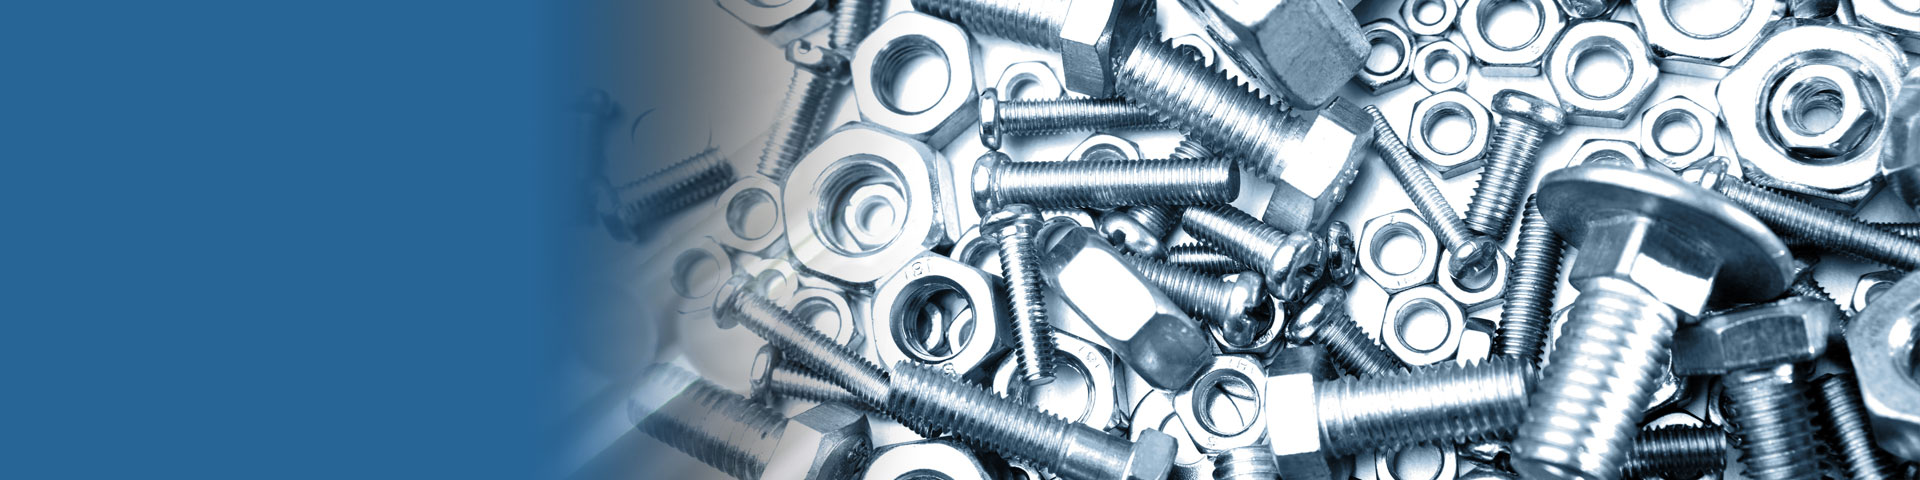 317L Stainless Steel Fasteners